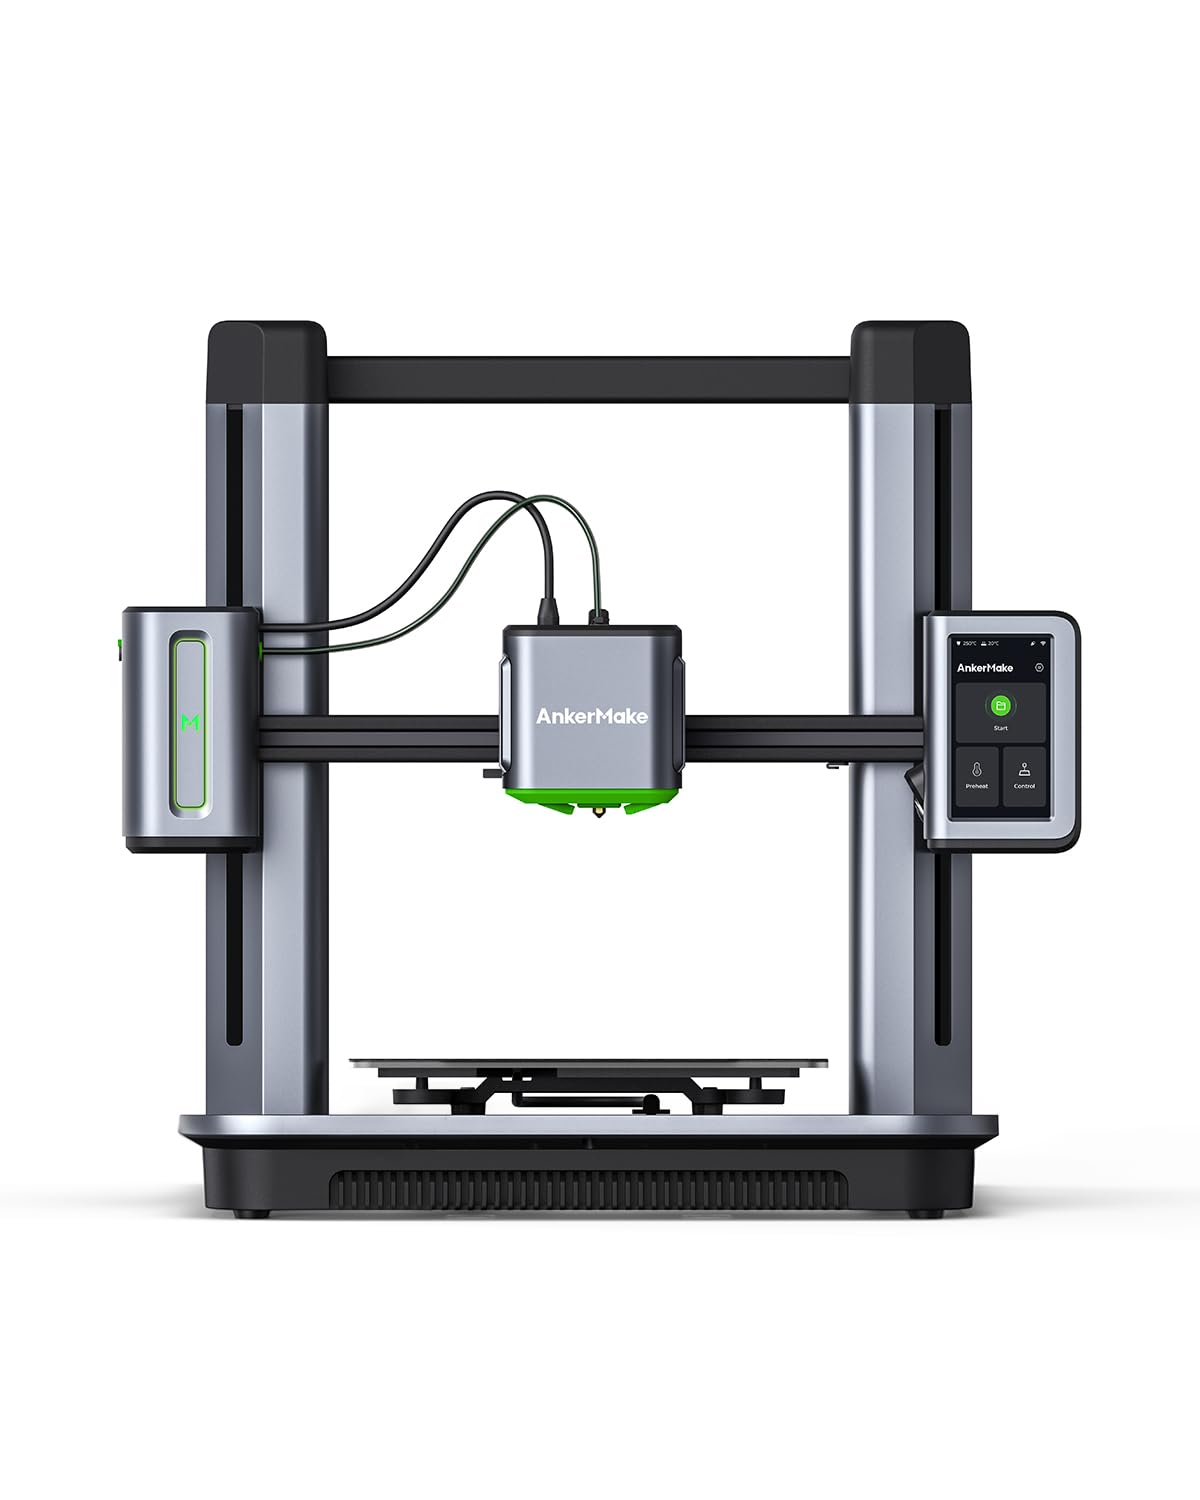 Prime Members: AnkerMake M5 3D Printer w/ 500 mm/s Speed $500 + Free Shipping